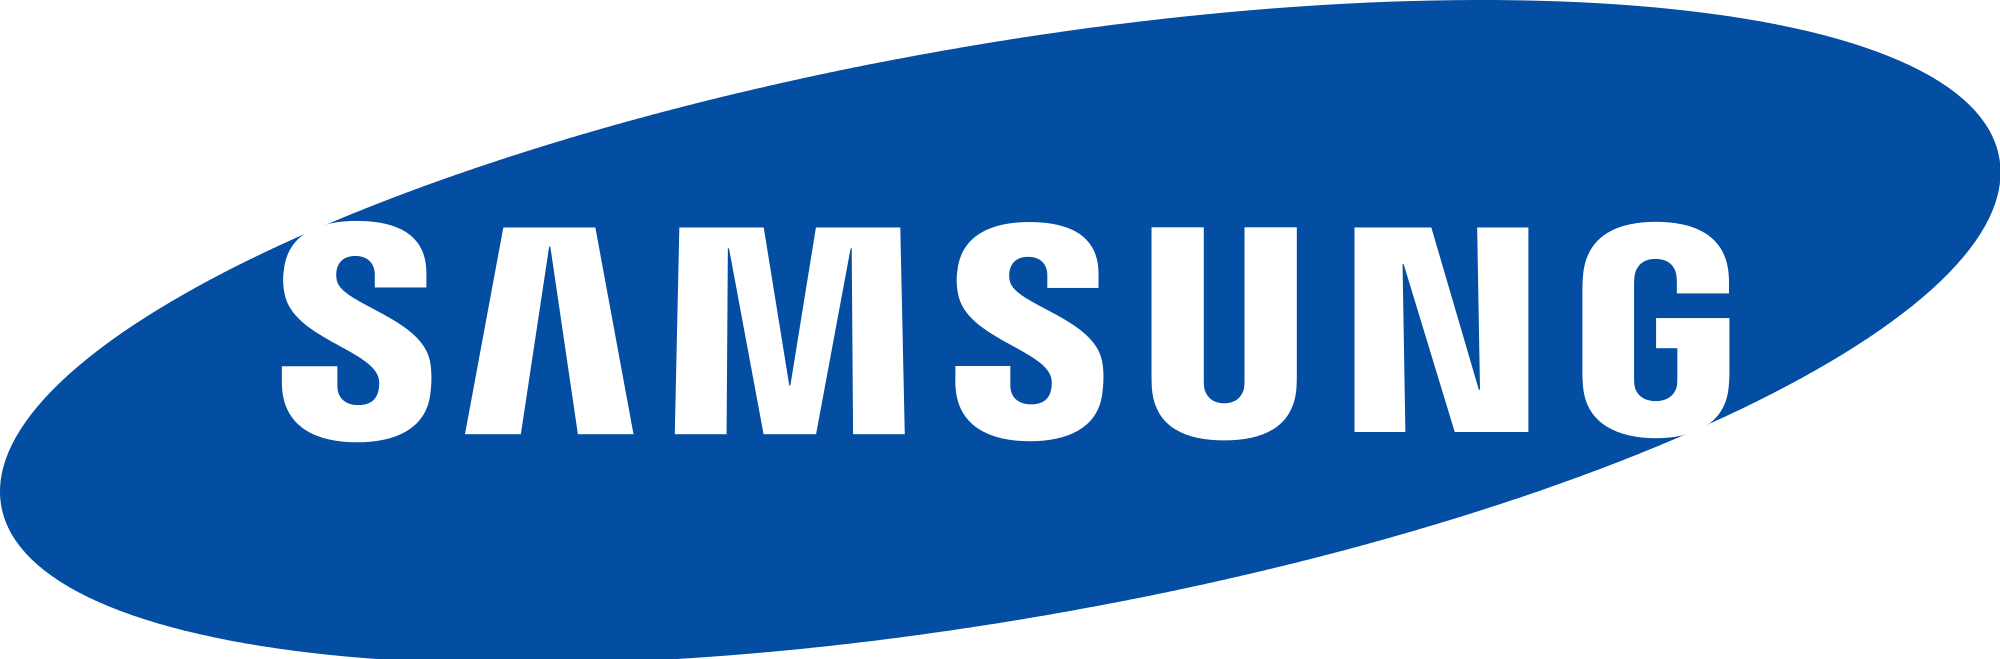 Samsung Collection